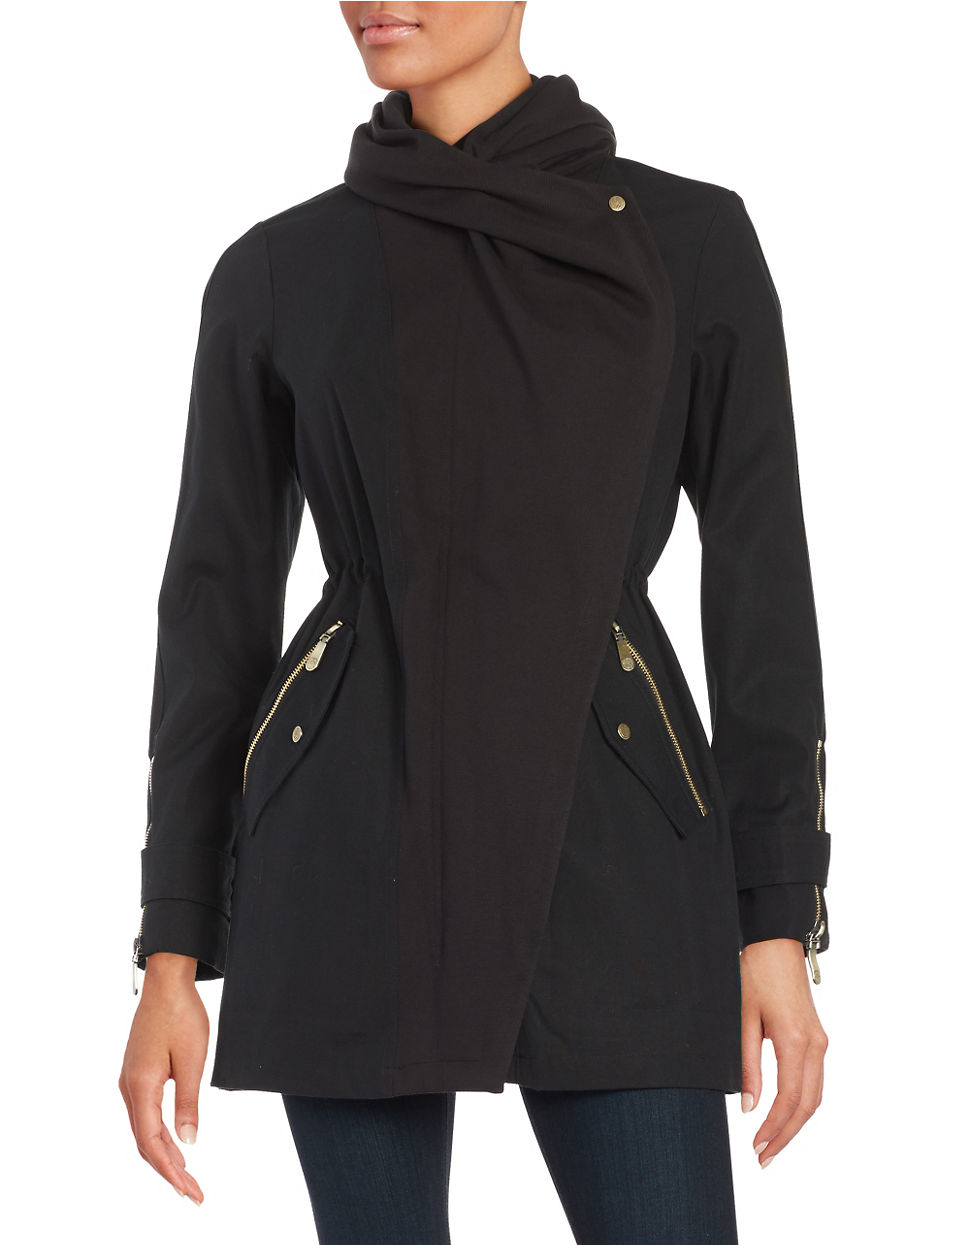 Vince camuto Cascade Parka Jacket in Black | Lyst